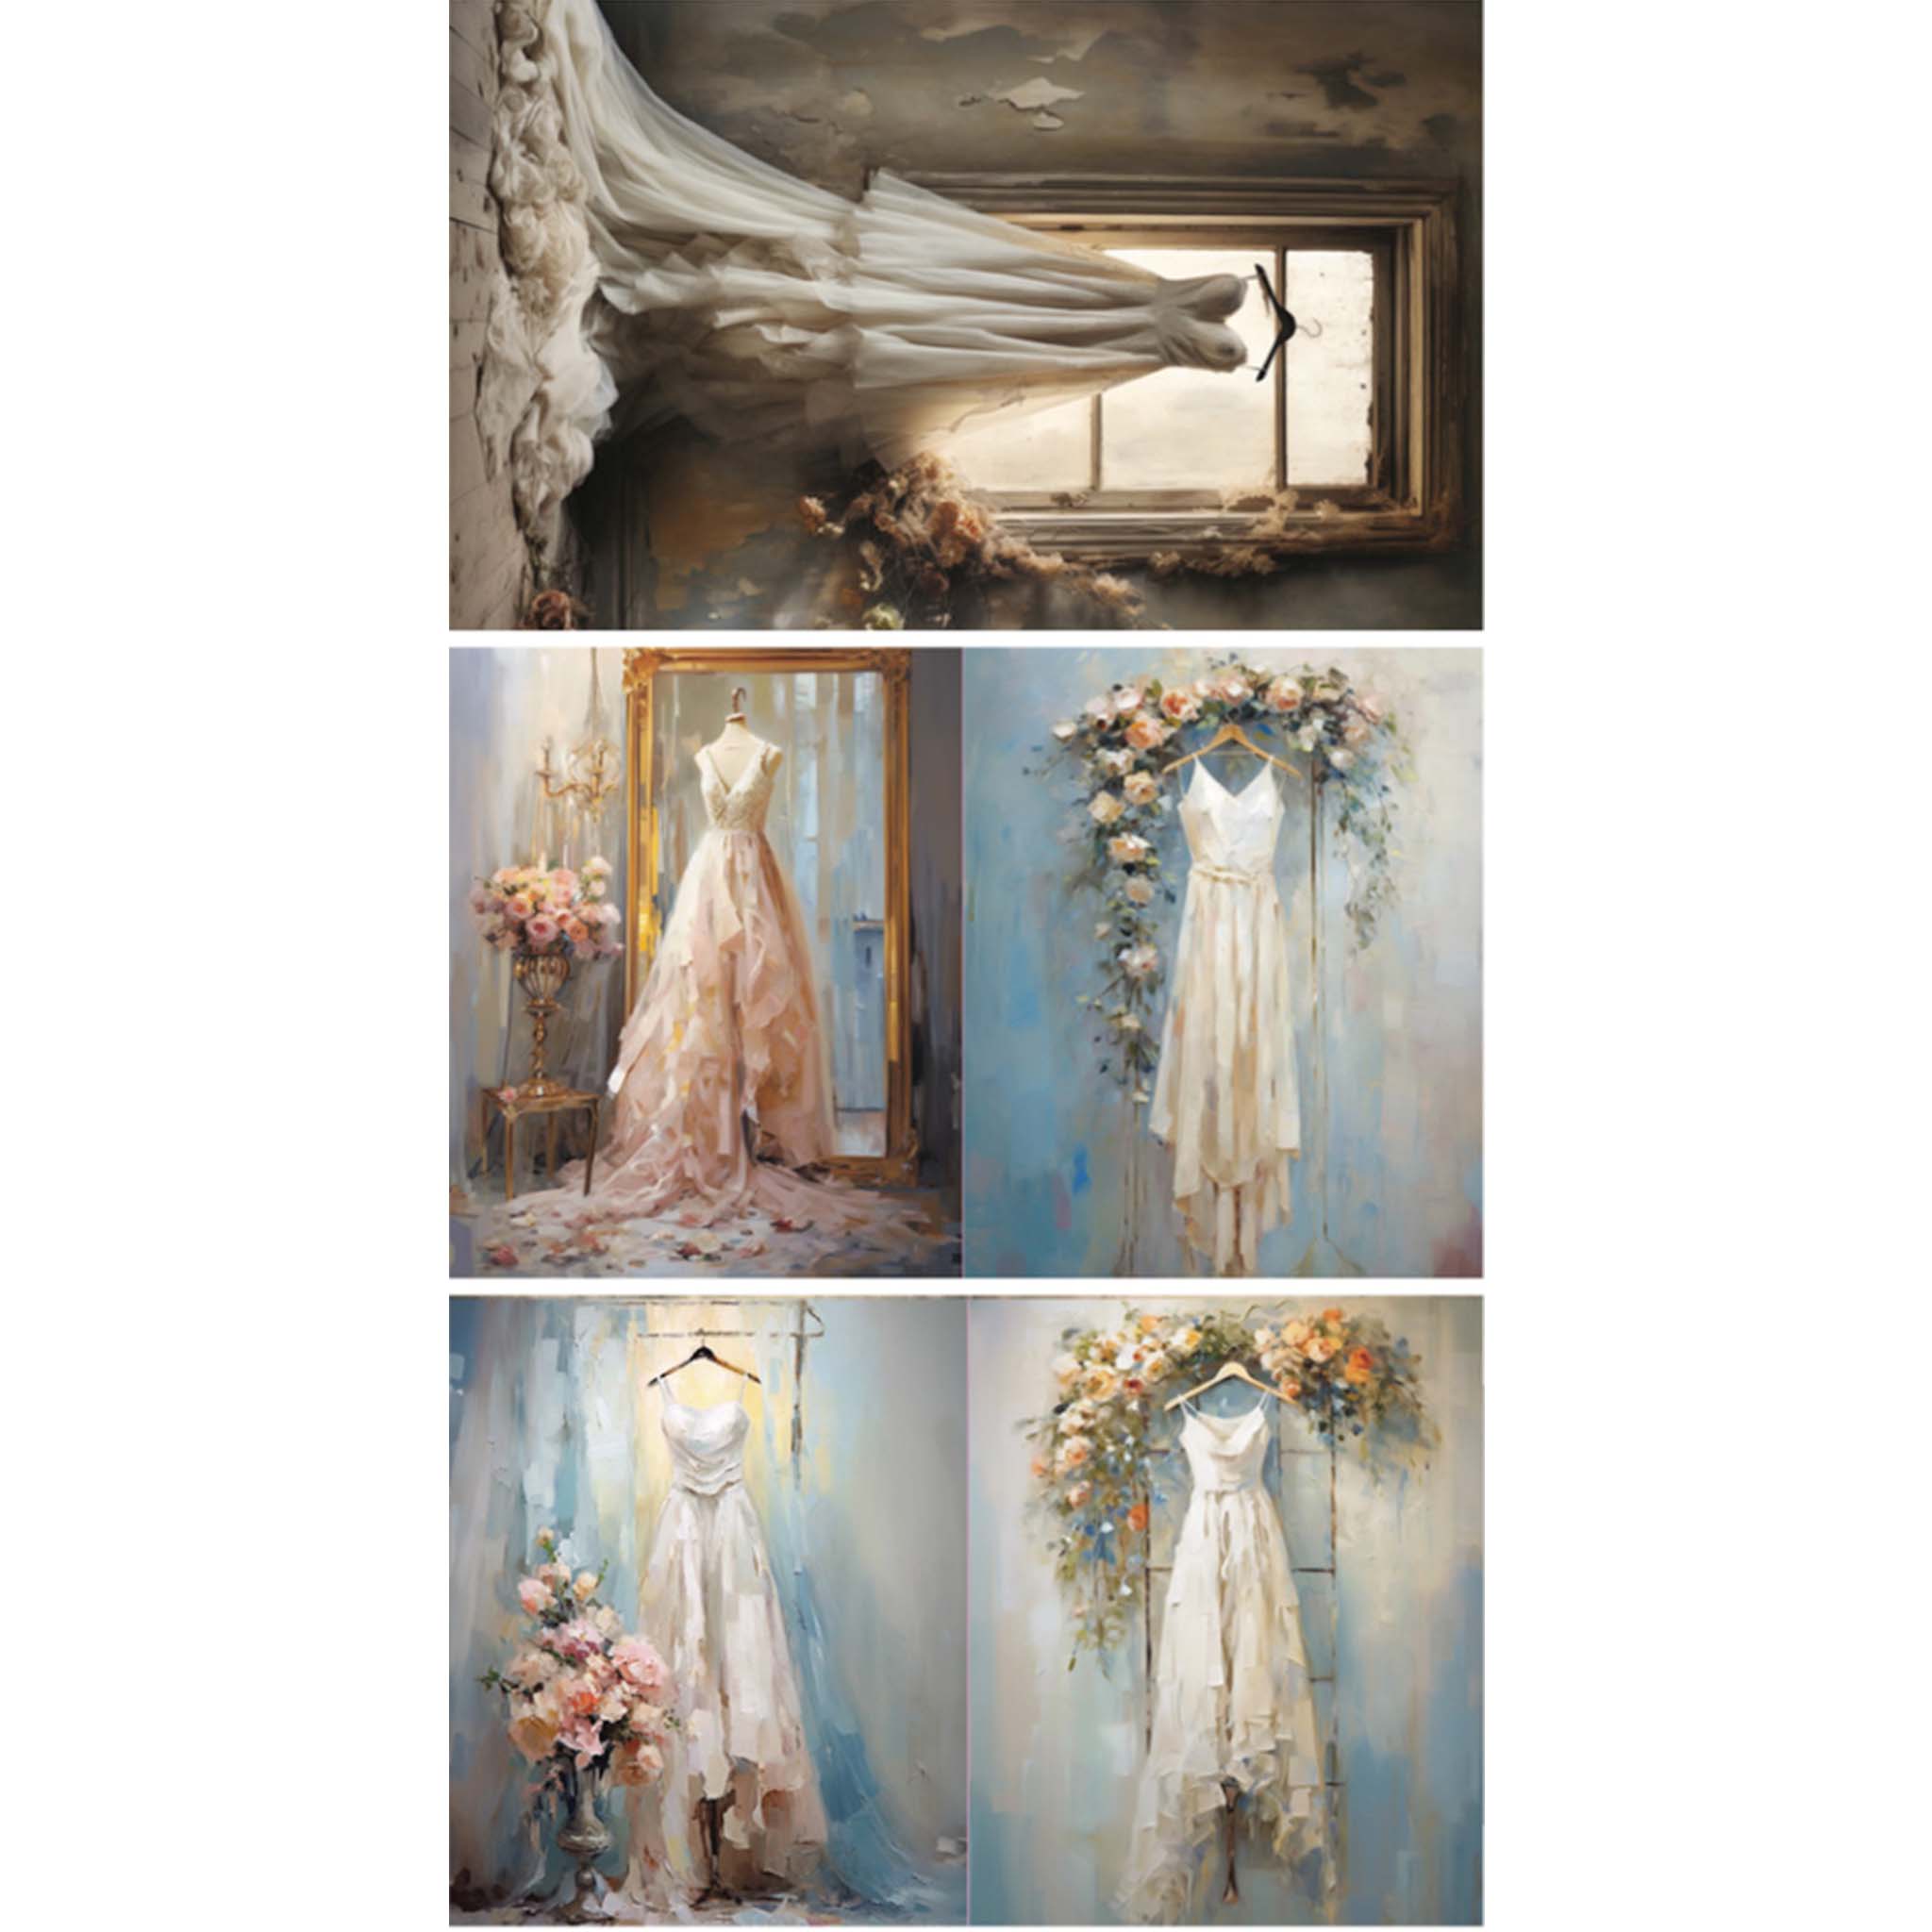 Three sheets of tissue paper against a white background that feature five unique white wedding gown designs against shabby chic backdrops with flowers.